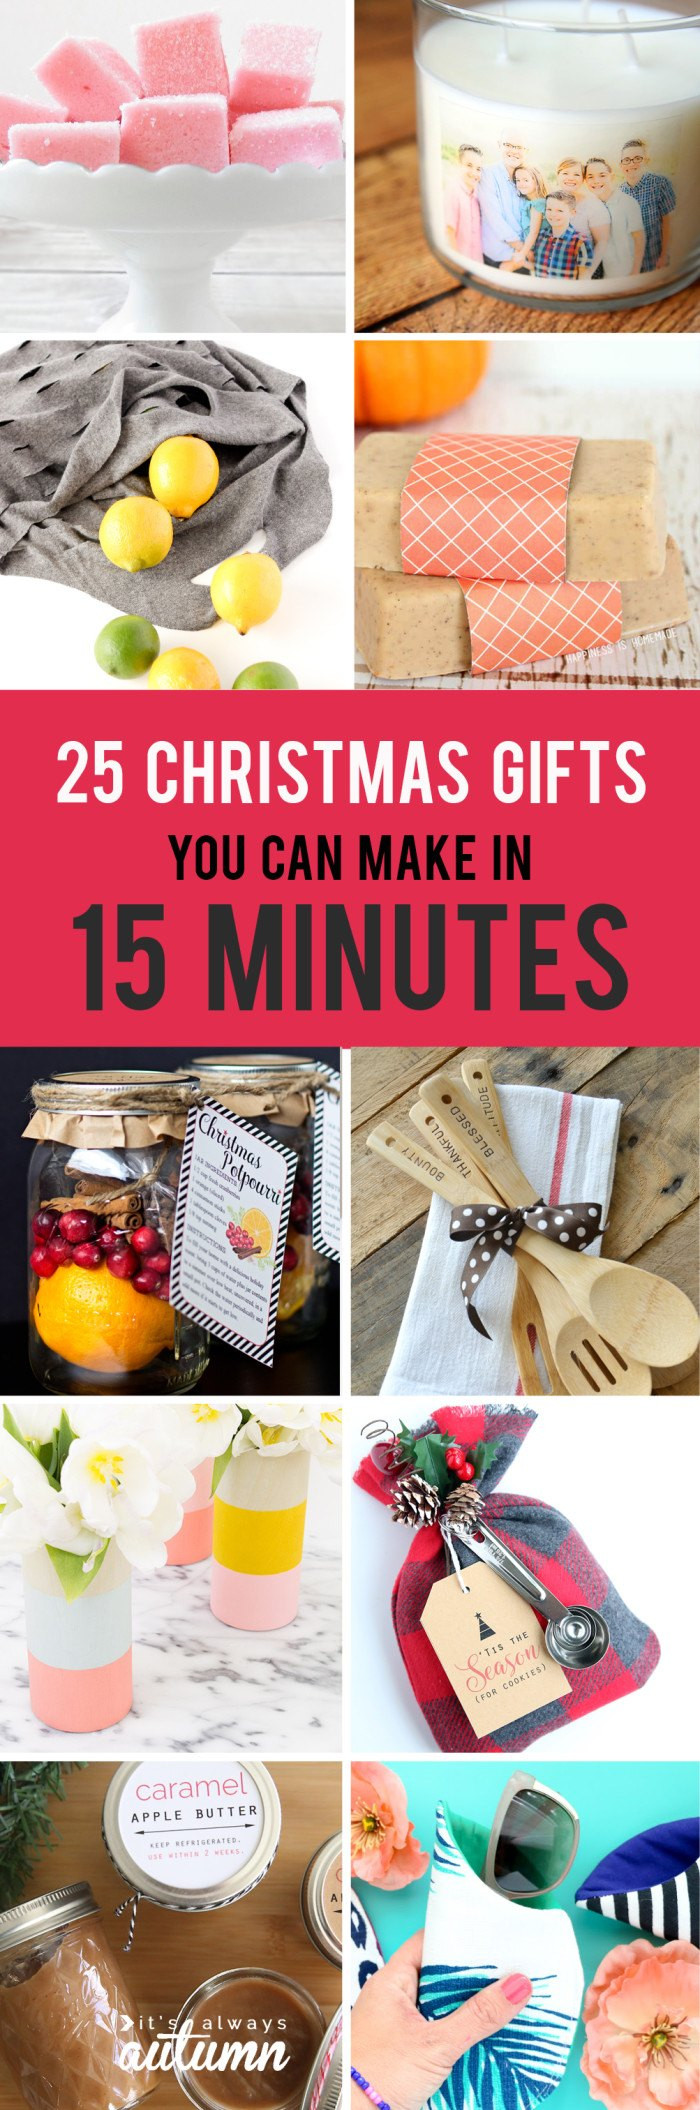 Unique DIY Gifts
 25 Easy Christmas Gifts That You Can Make in 15 Minutes